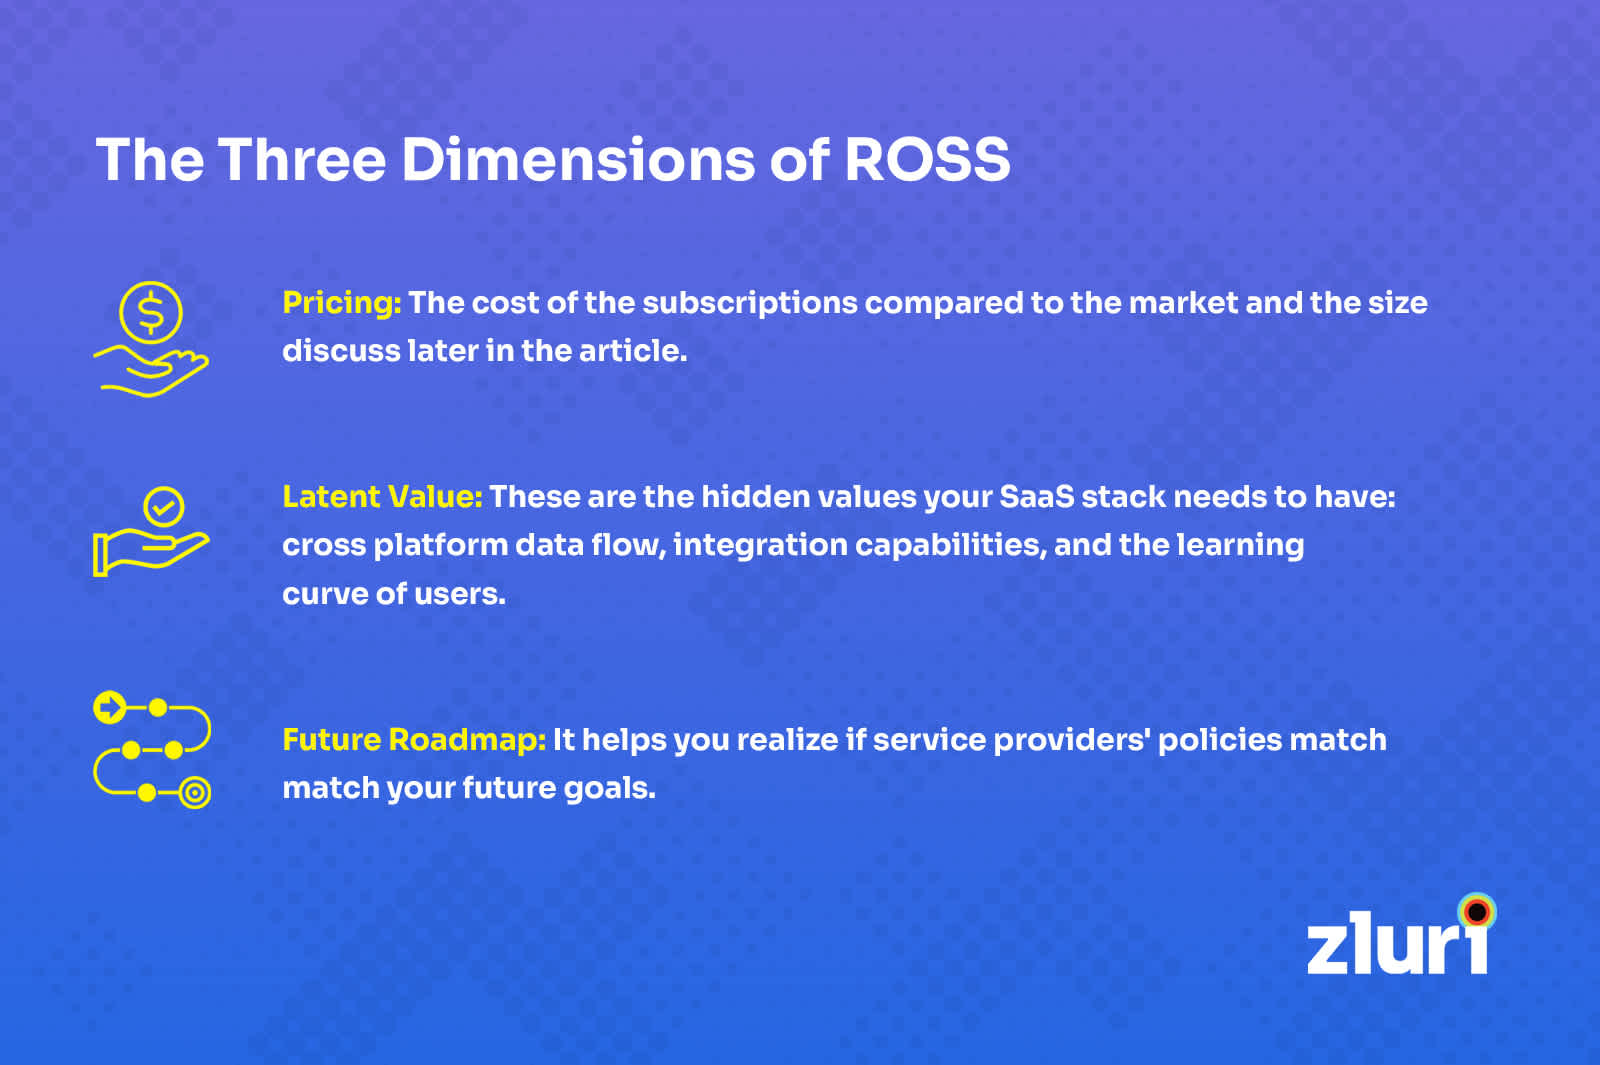 ross - 3 dimensions